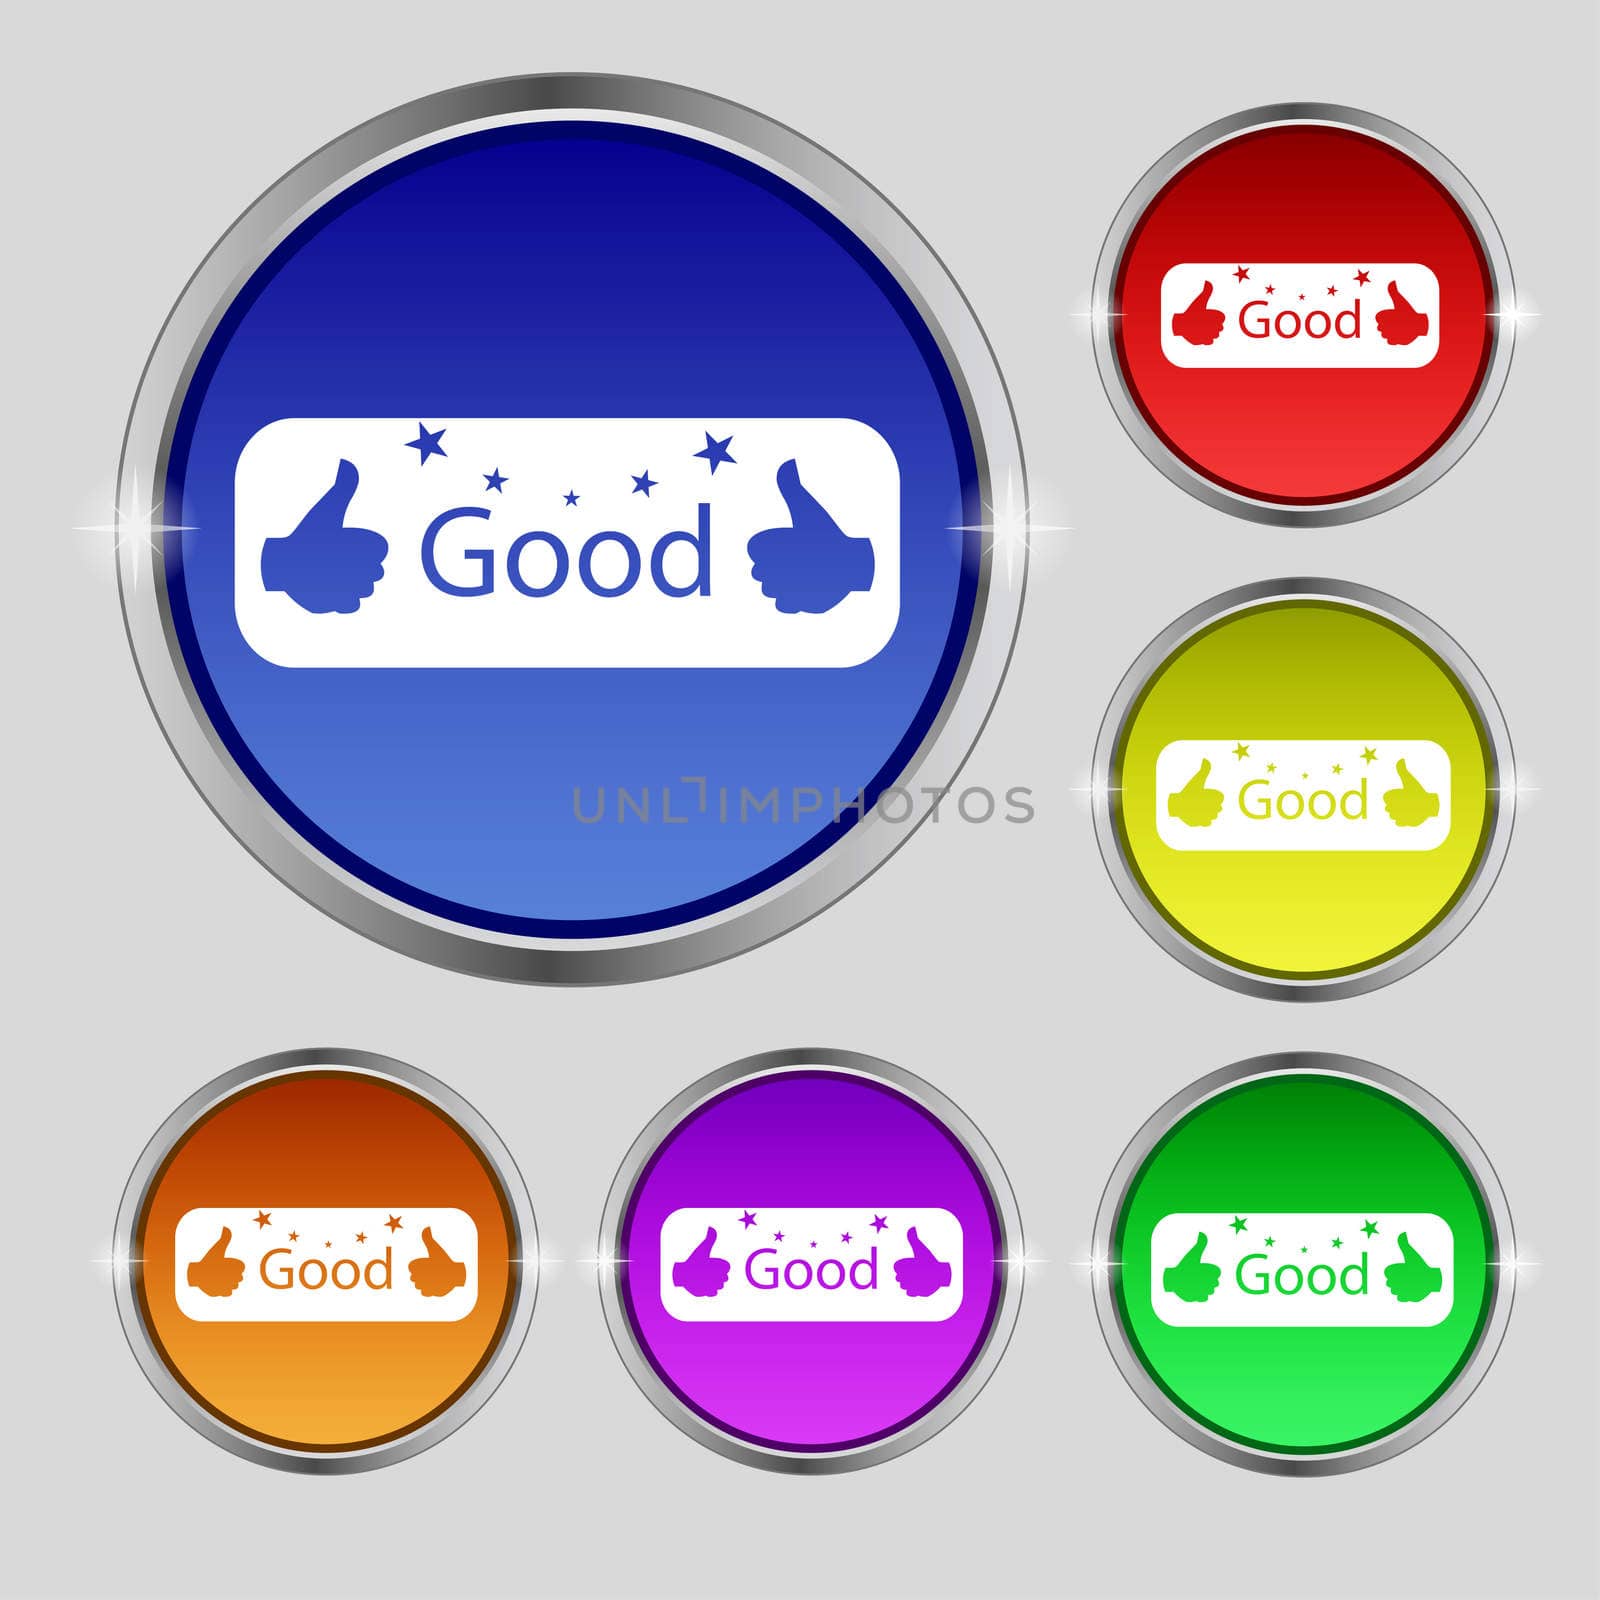 Good sign icon. Set of colored buttons. illustration